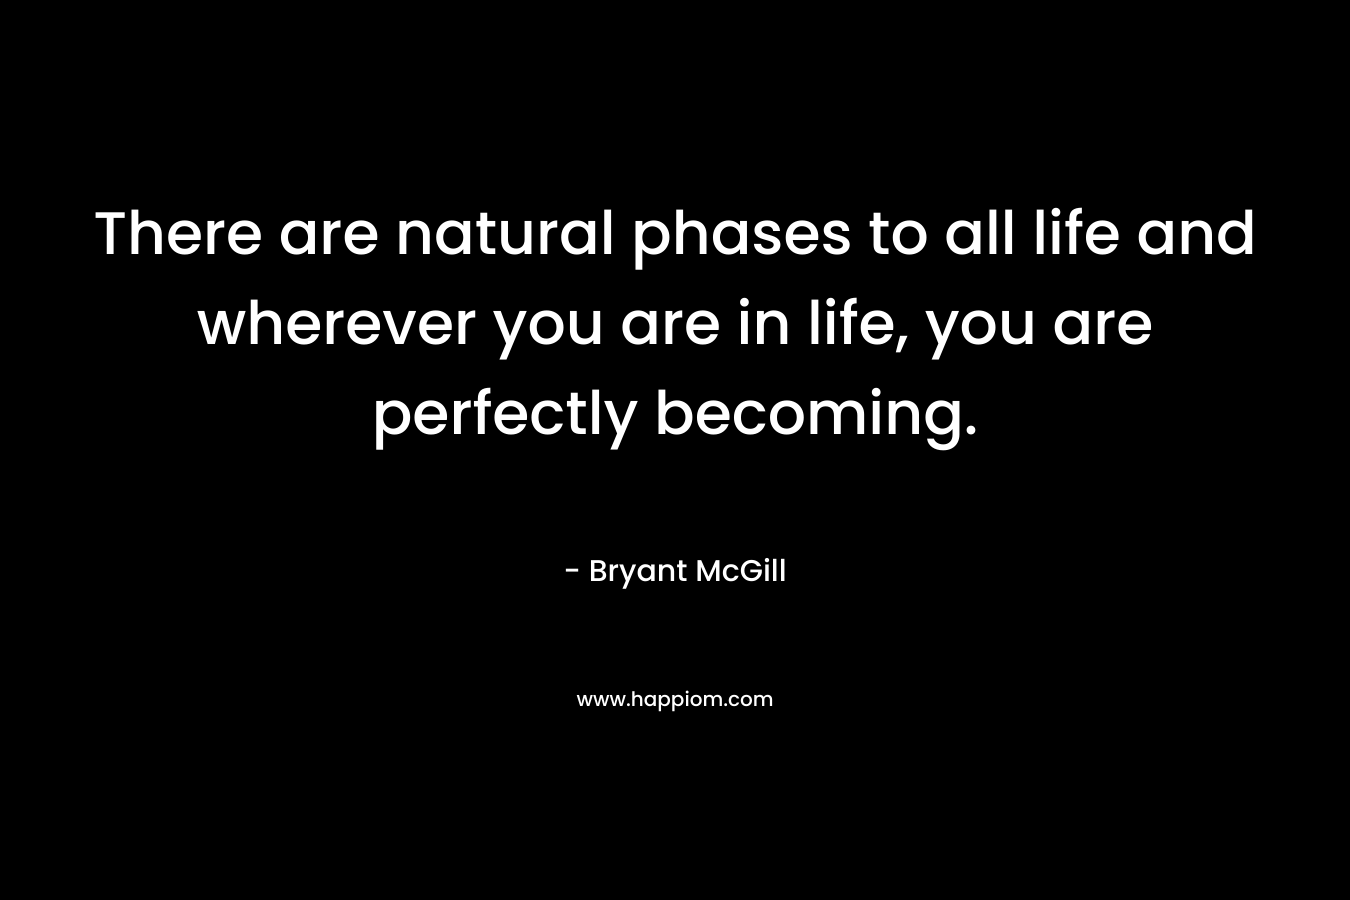 There are natural phases to all life and wherever you are in life, you are perfectly becoming.